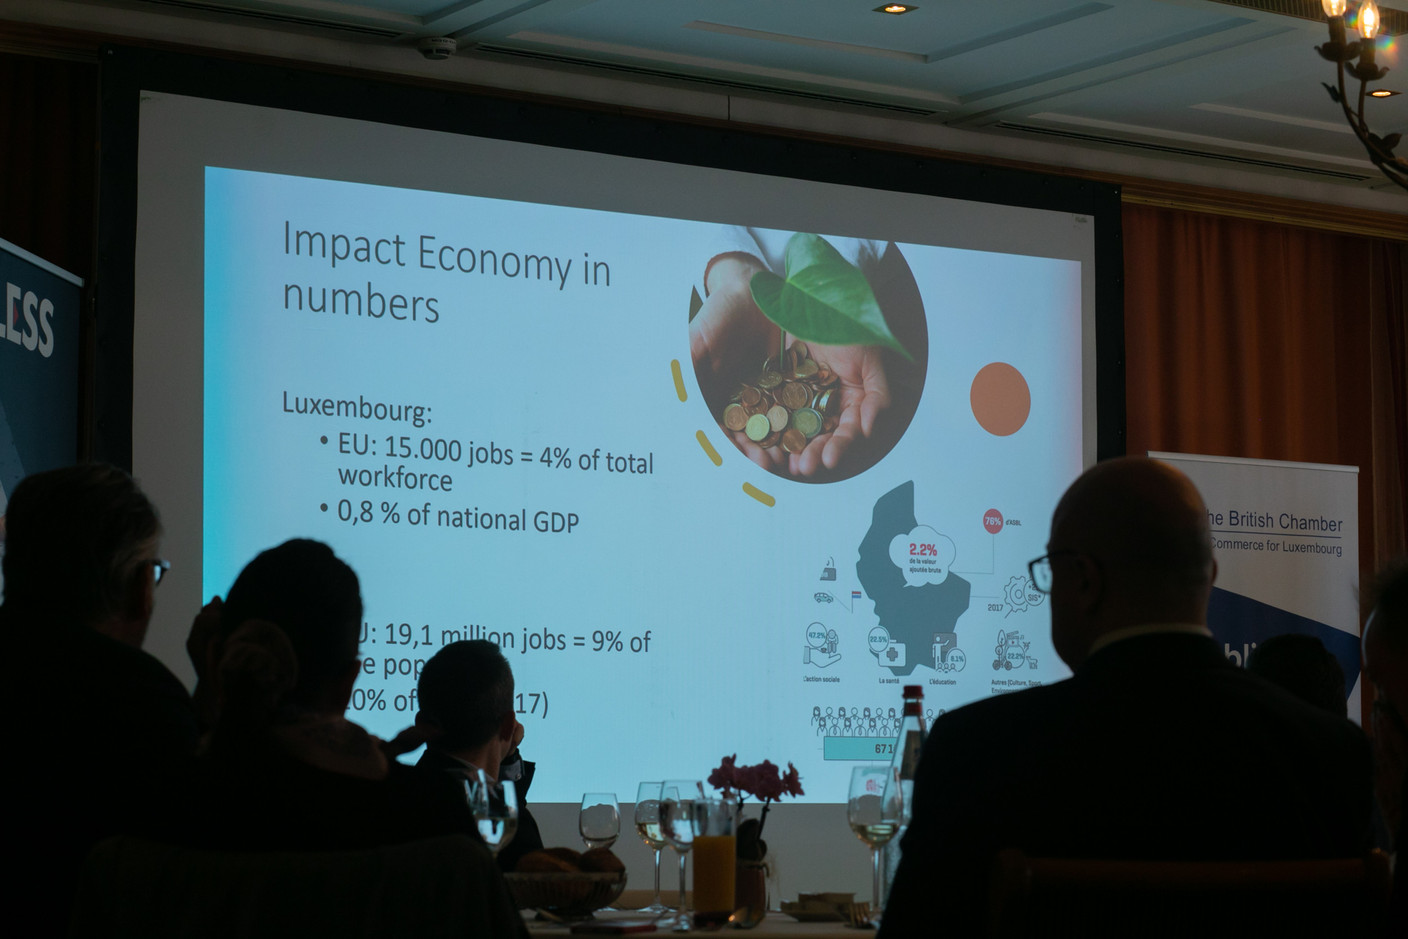 The Impact Luxembourg lunch event, hosted by the British Chamber of Commerce on 21 February 2023 at the Hotel Parc Belair, featured discussions on boosting the visibility of the social economy. Photo: Matic Zorman / Maison Moderne